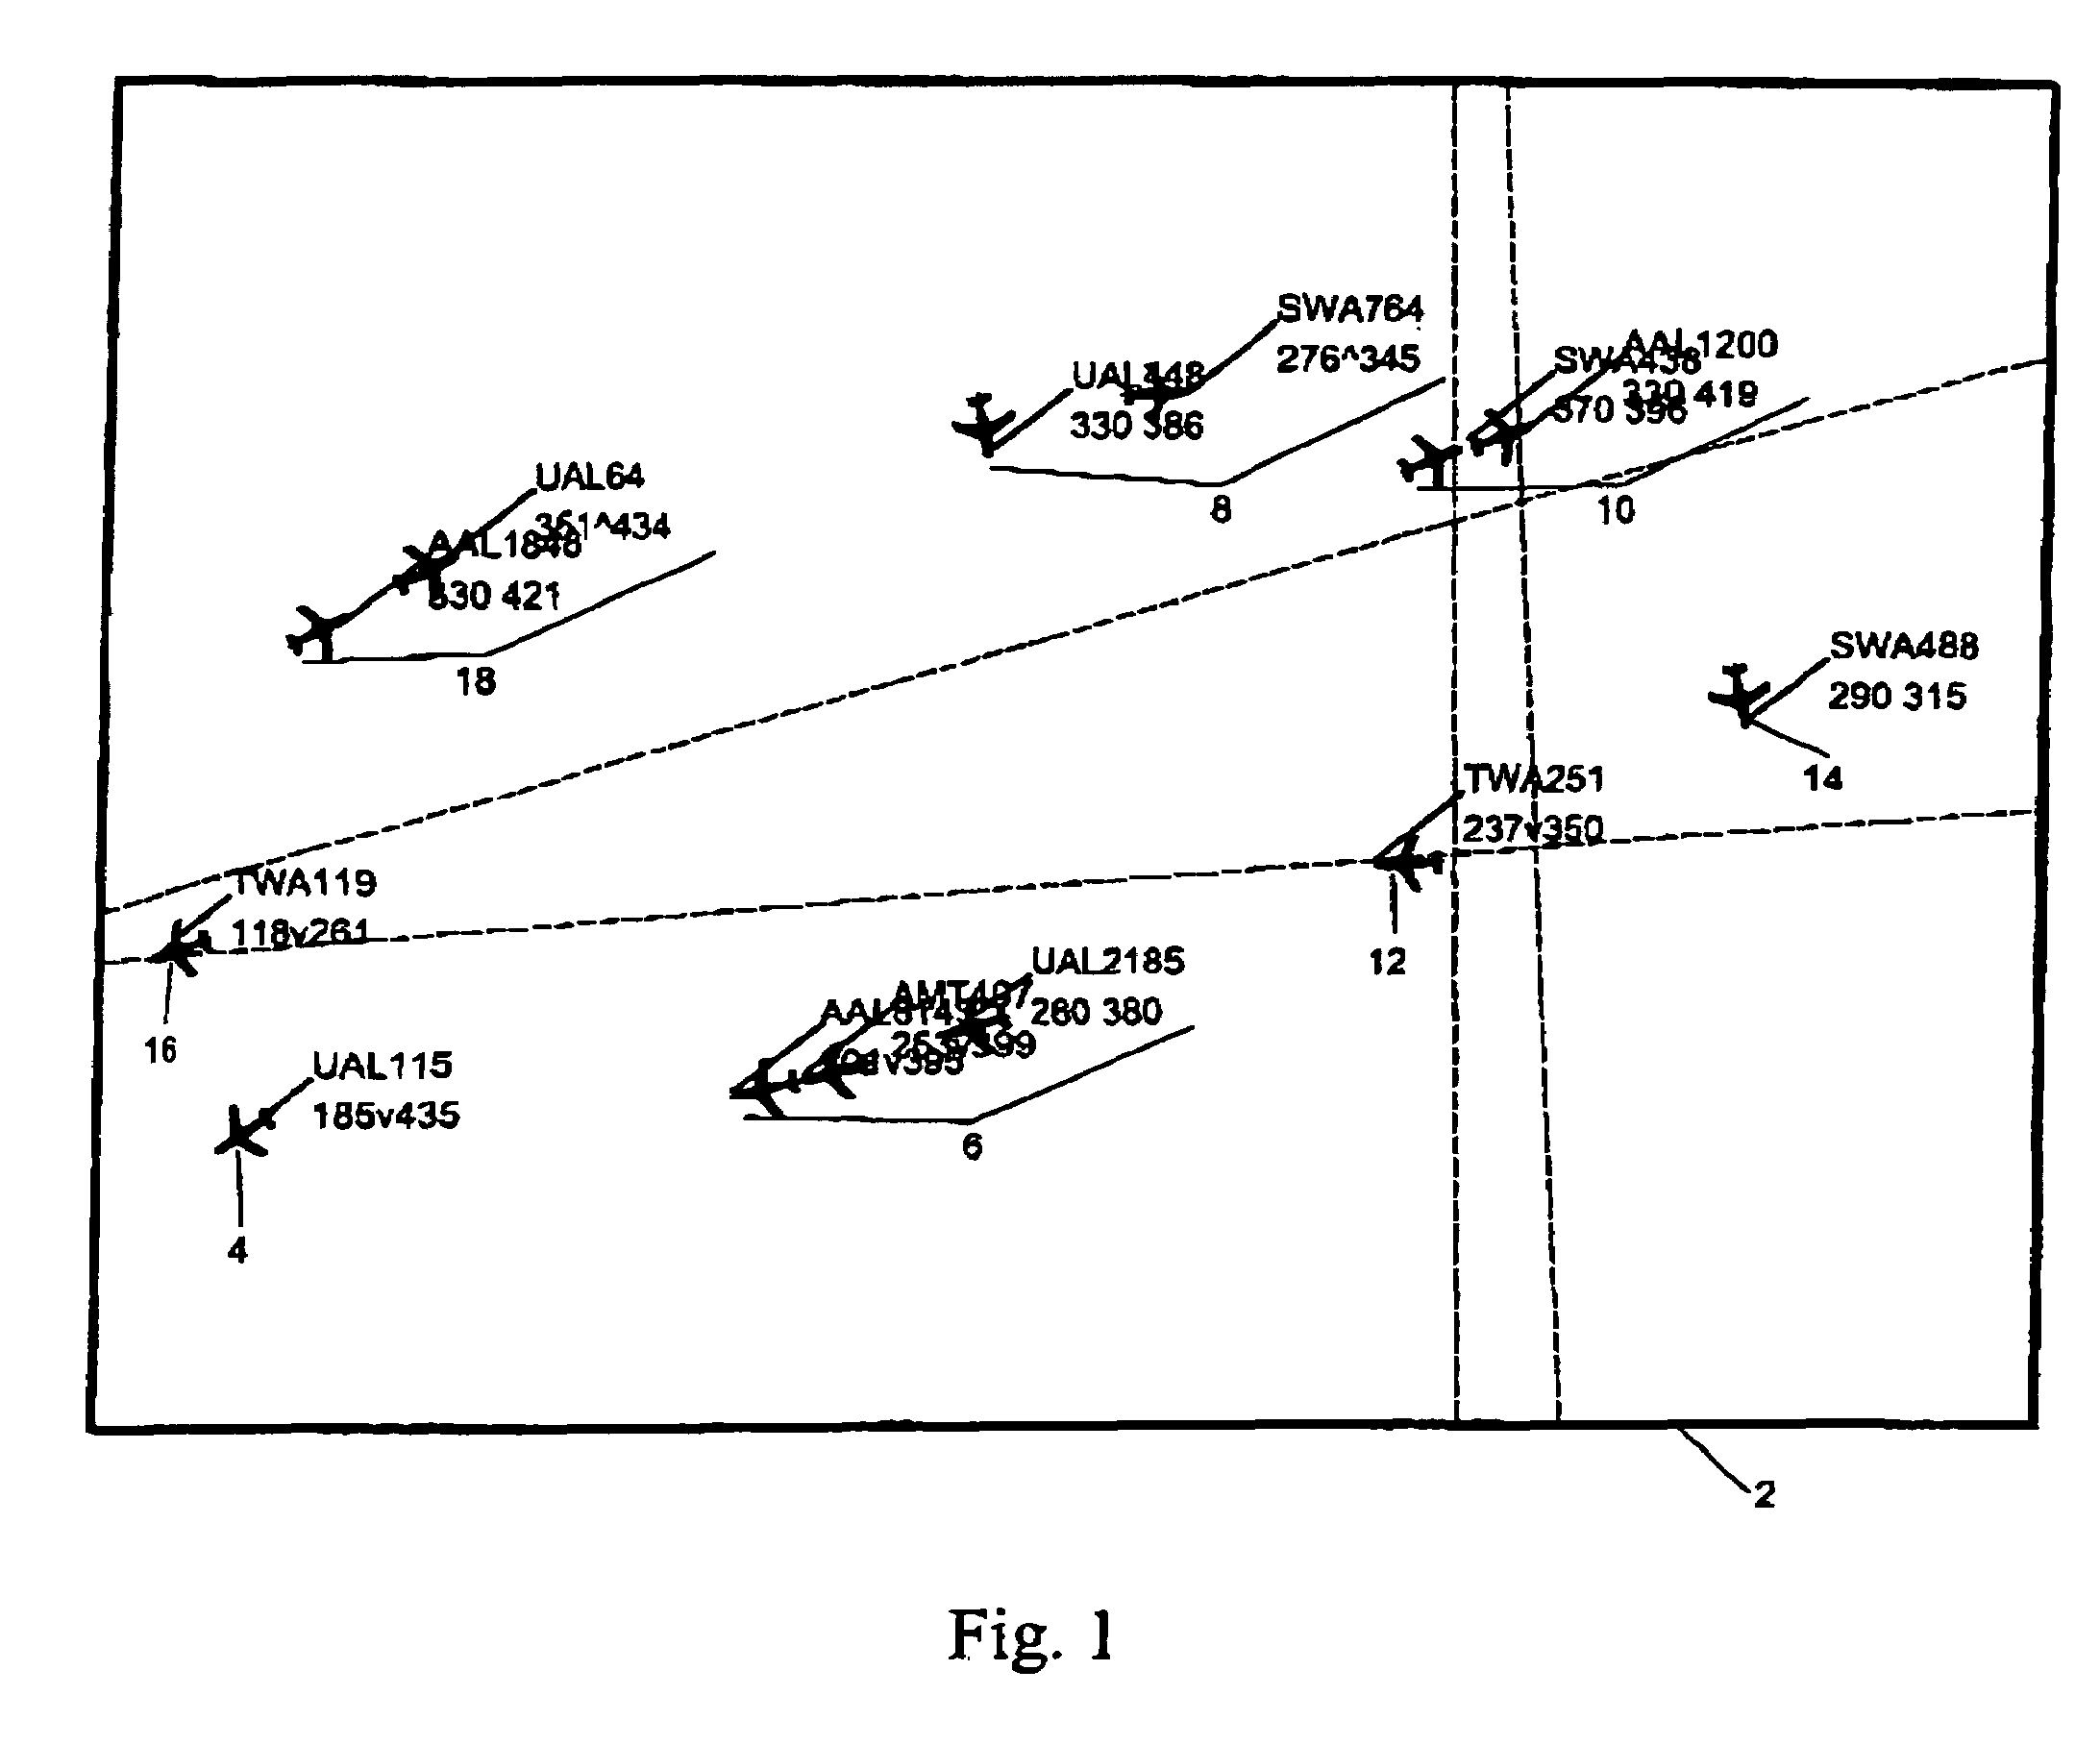 System and method for automatic placement of labels for interactive graphics applications